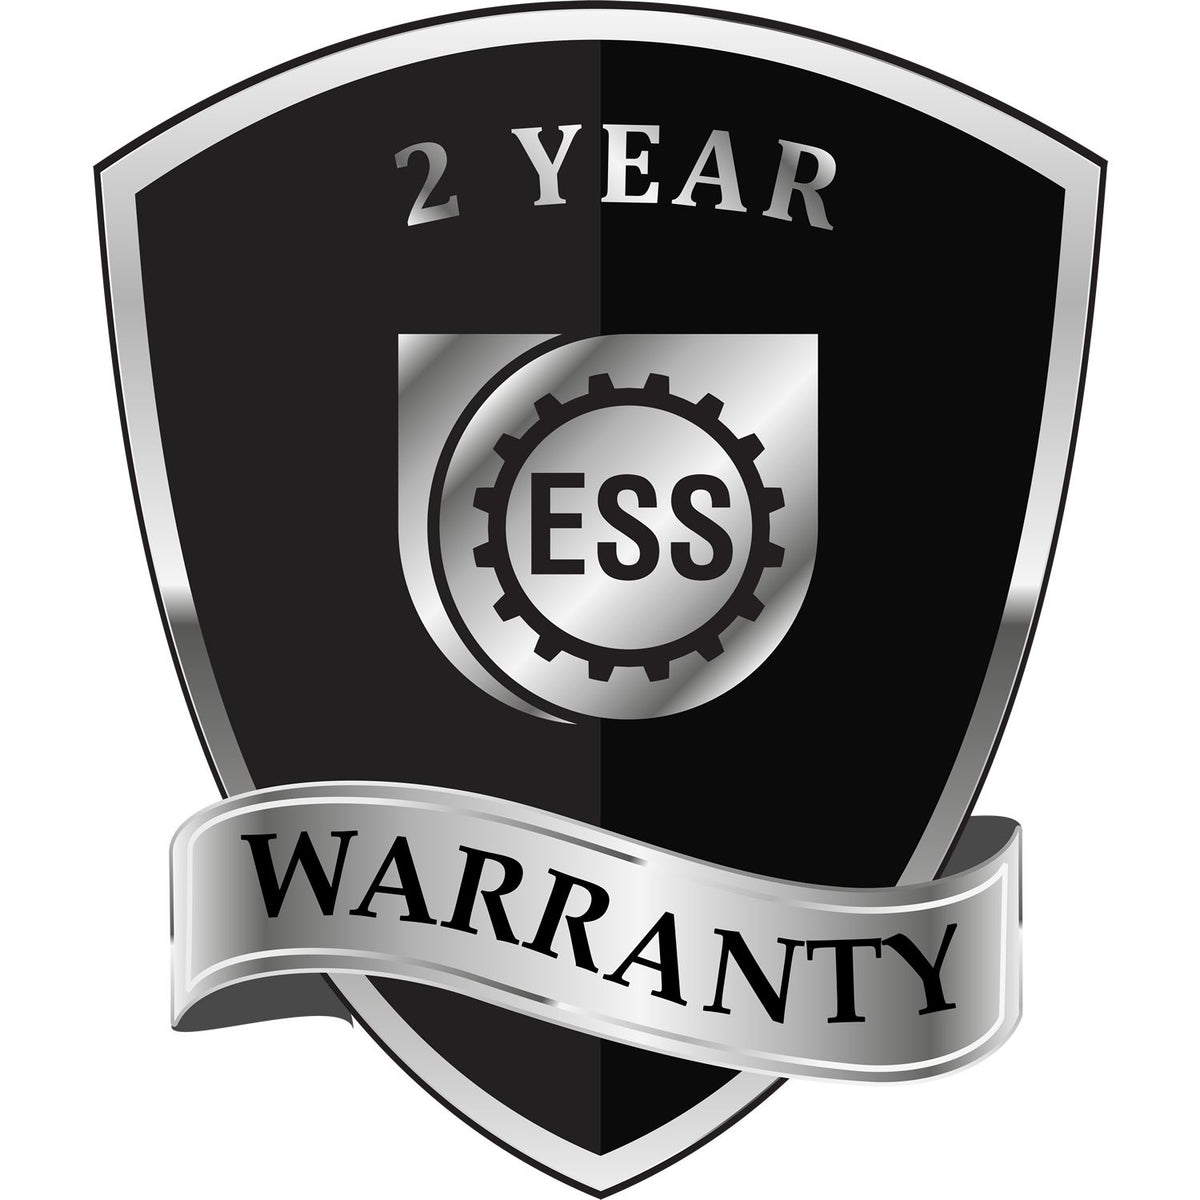 A badge or emblem showing a warranty icon for the Extended Long Reach Missouri Surveyor Embosser